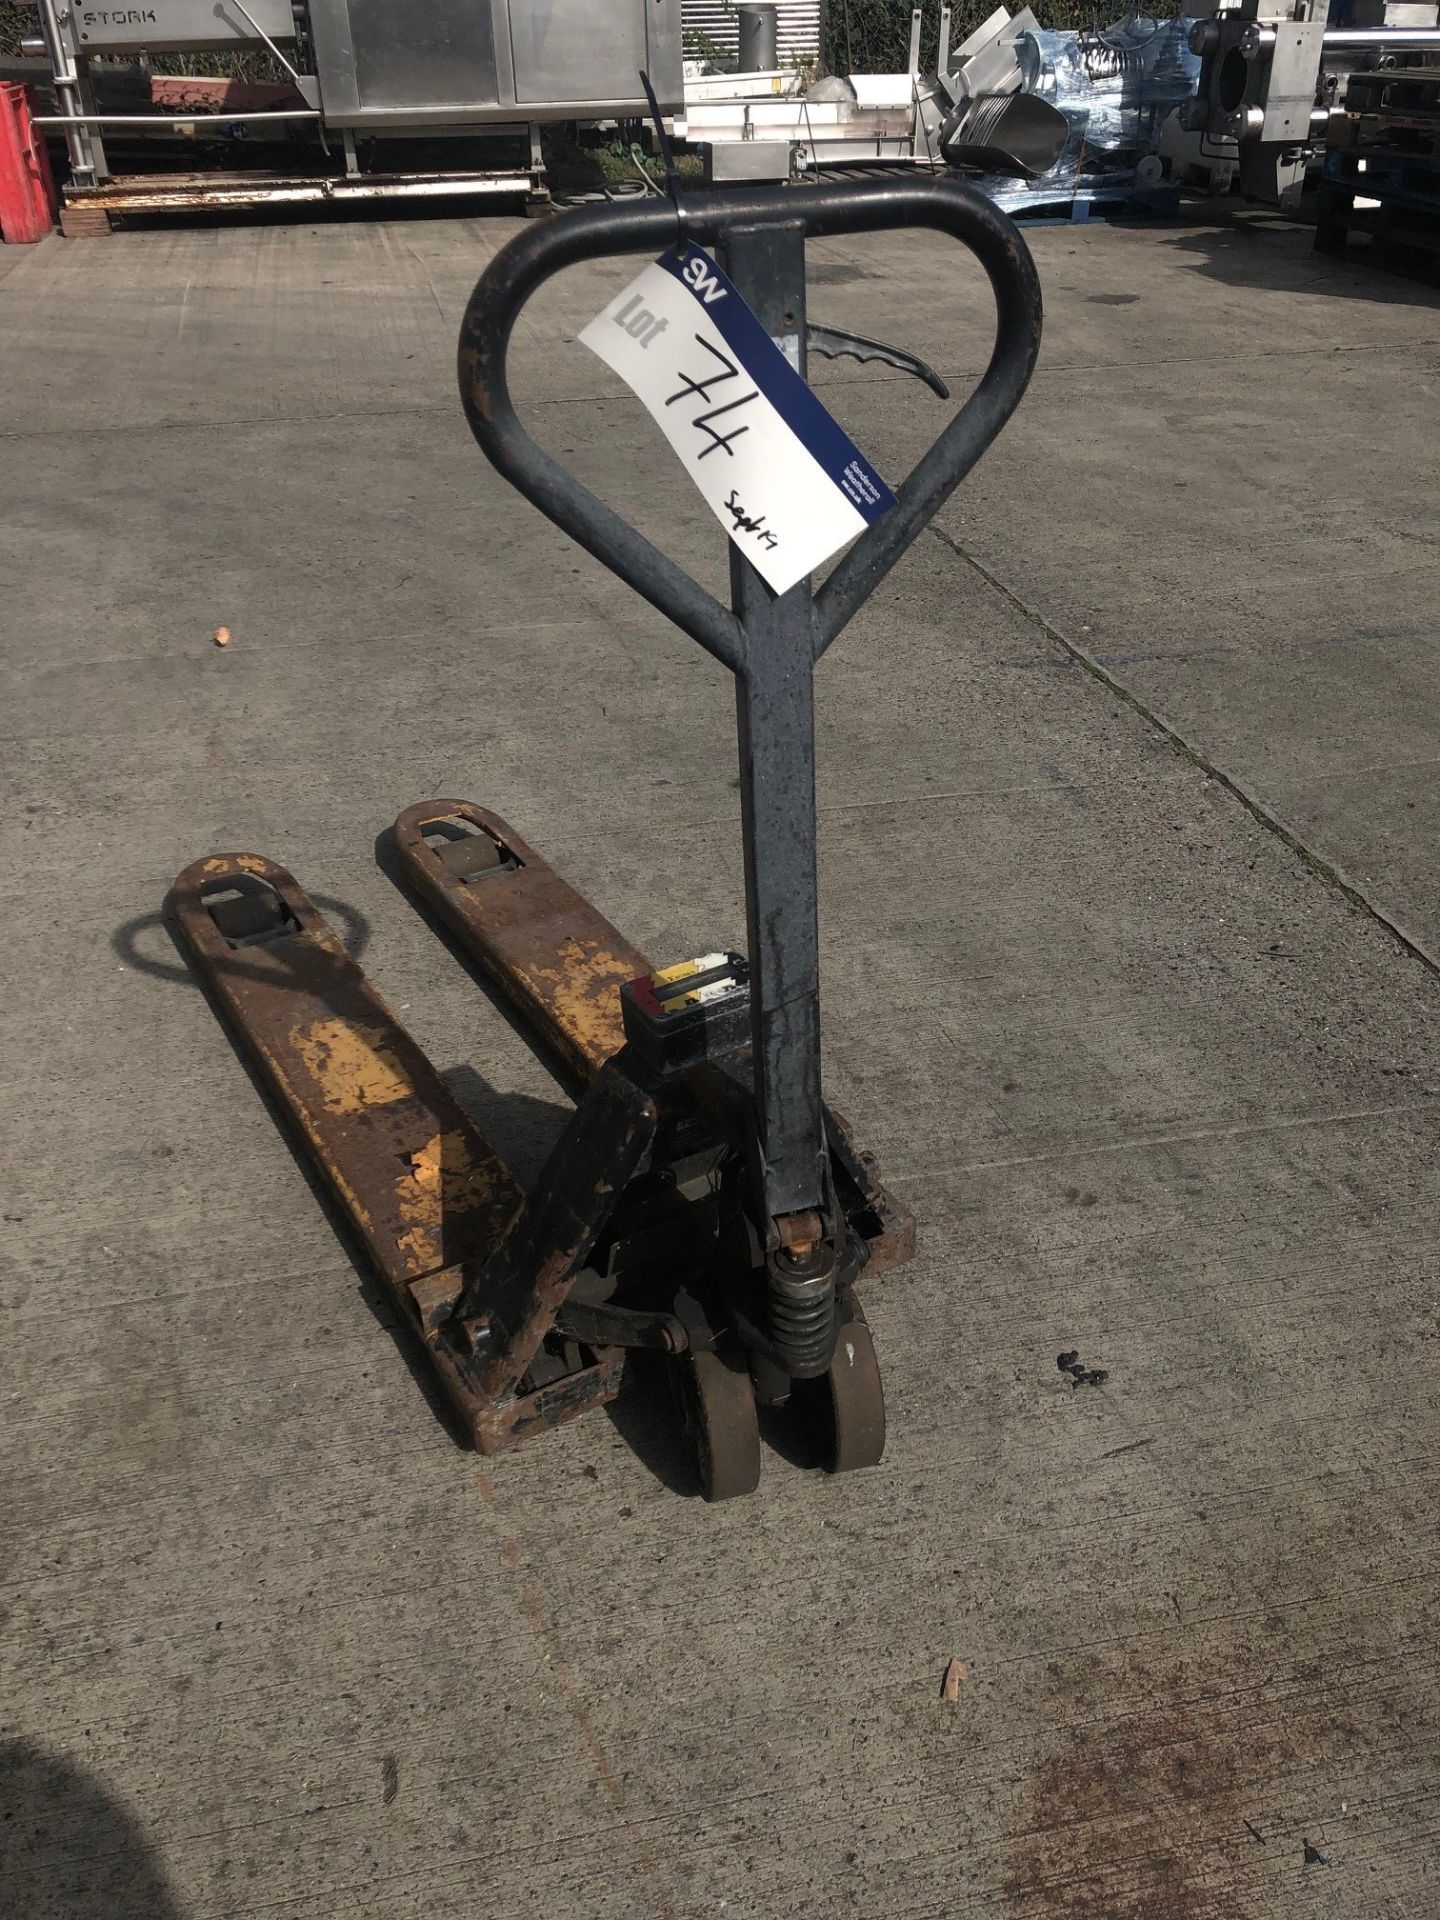 Hand Hydraulic Pallet Truck, lift out charge - £10 - Image 2 of 2